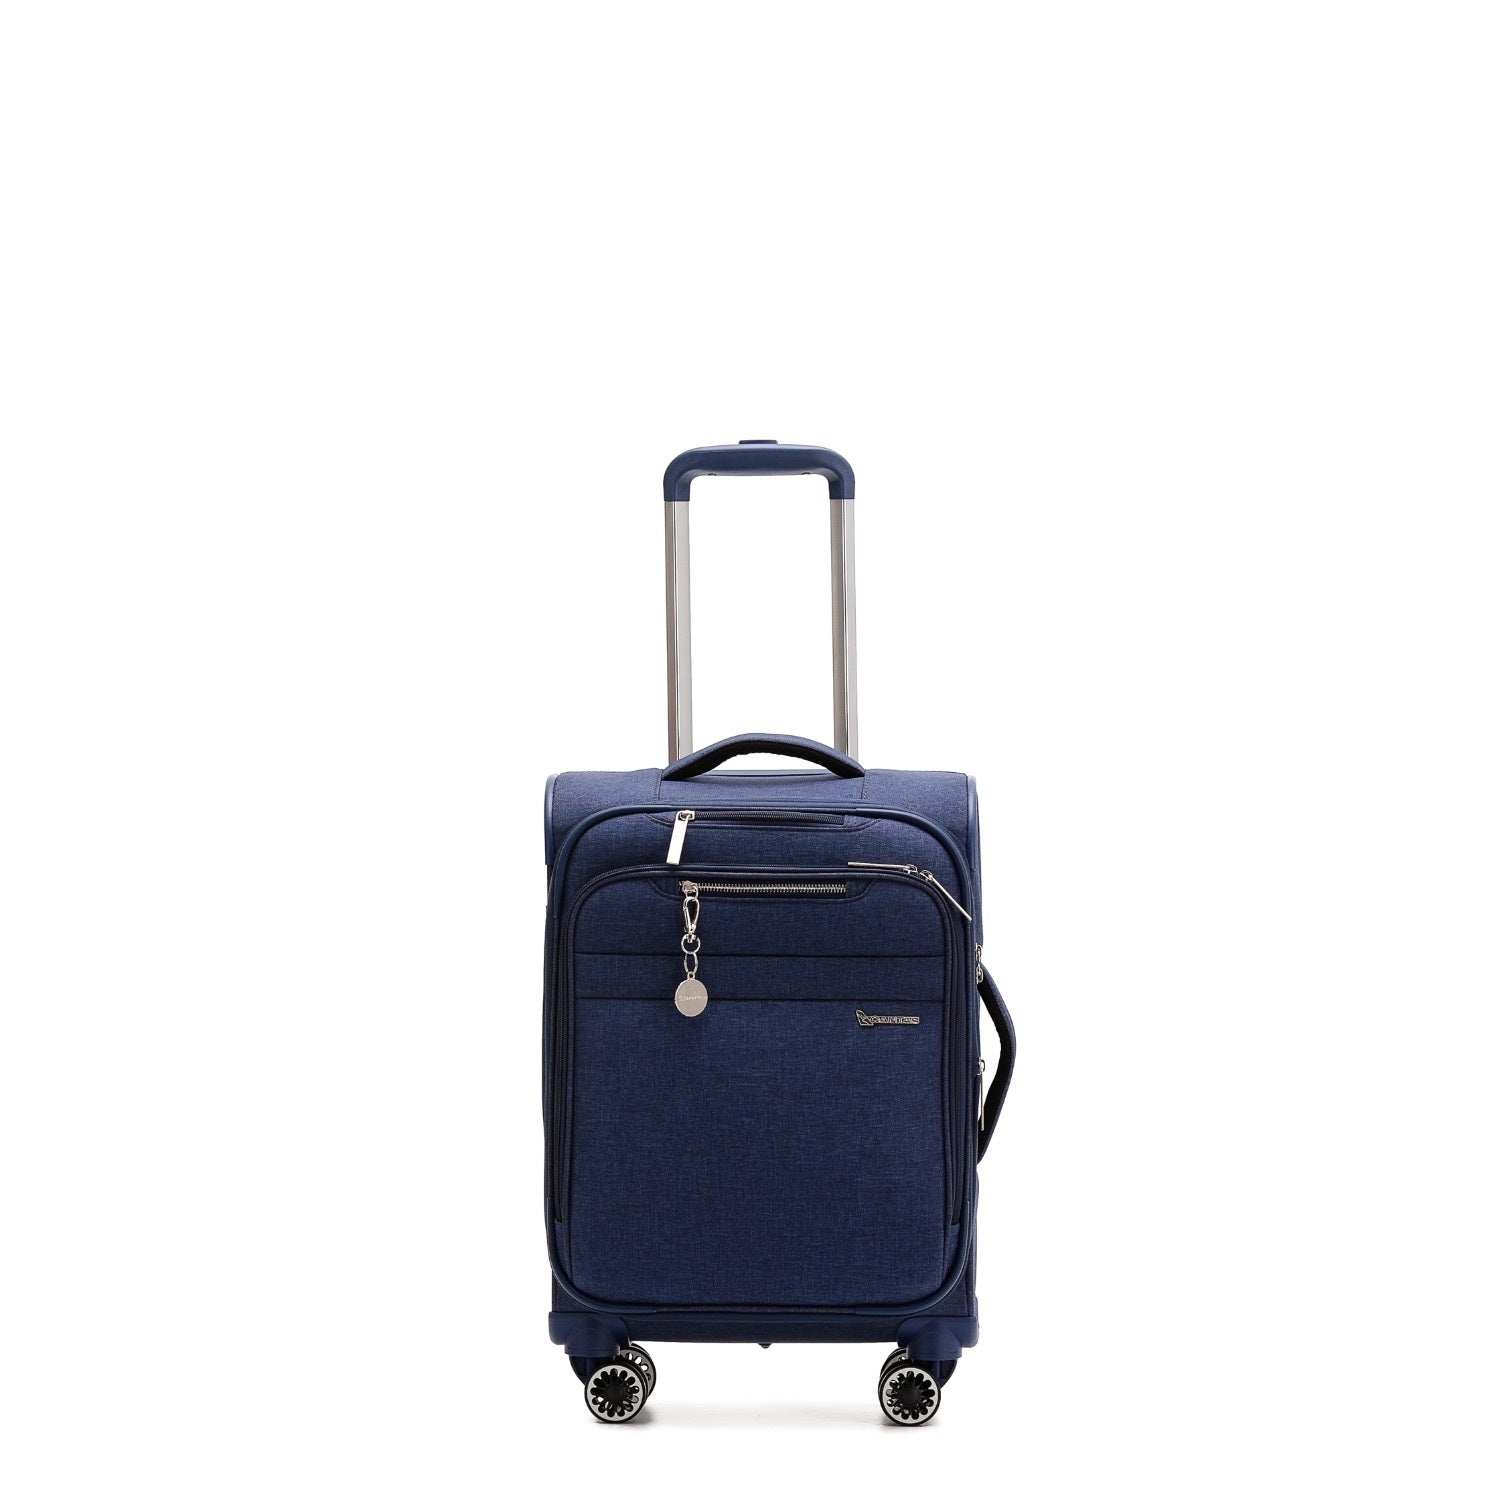 Qantas - QF400 55cm Small Adelaide Soft sided spinner - Navy-1